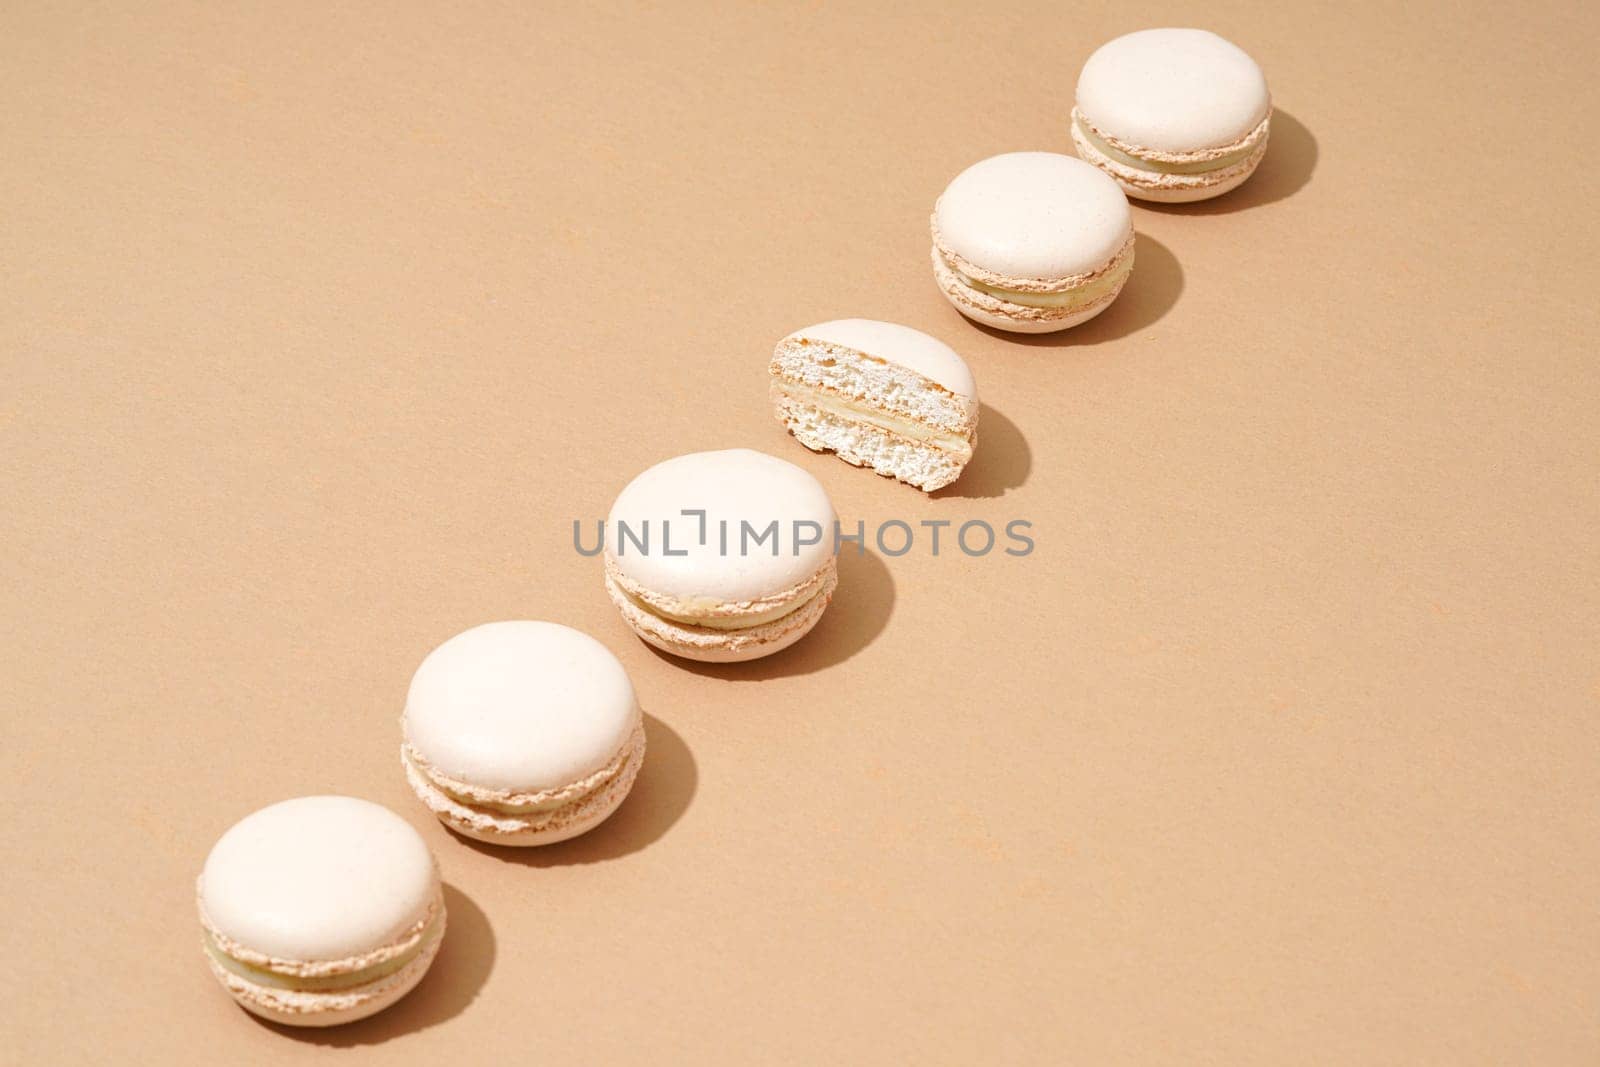 A still life image featuring six white macarons, arranged in a stack on top of each other by A_Karim